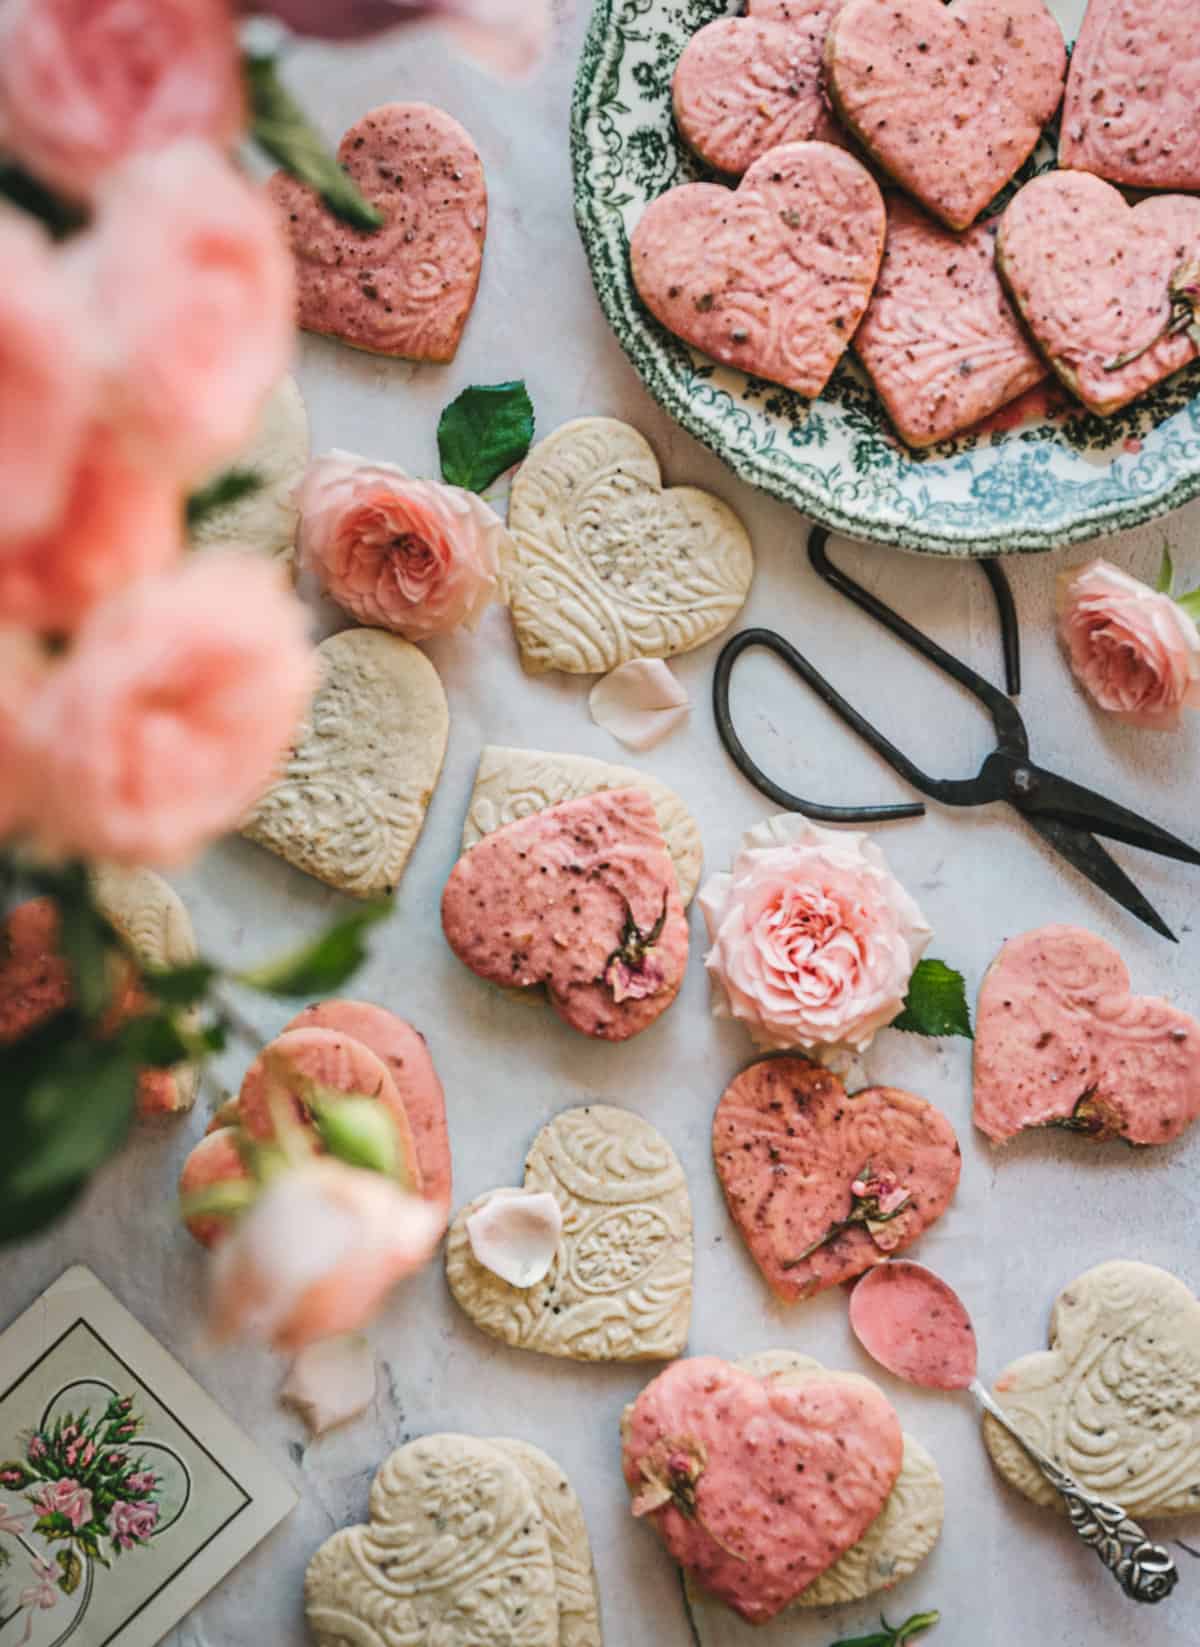 Rose cardamom shortbread cookies on a decorative plate.